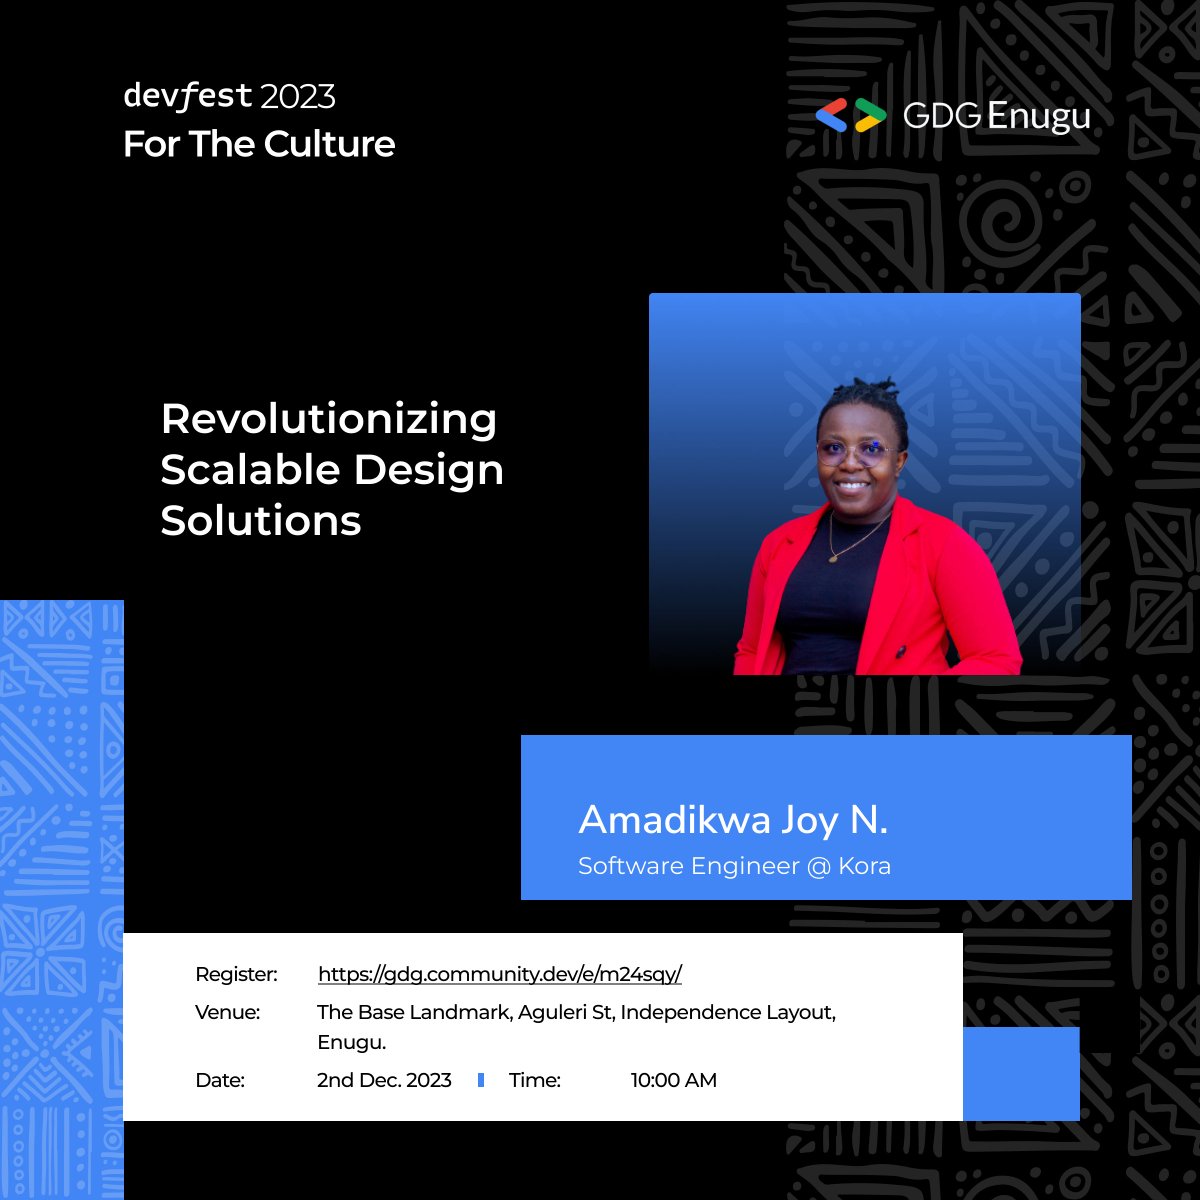 Speaker announcement! 🎉 Meet @AmadikwaJoy a highly skilled Software Engineer with a passion for building innovative technology solutions. She will be speaking on 'Revolutionizing Scalable Design Solutions' See you soon at DevFest Enugu. #DevFestEnugu